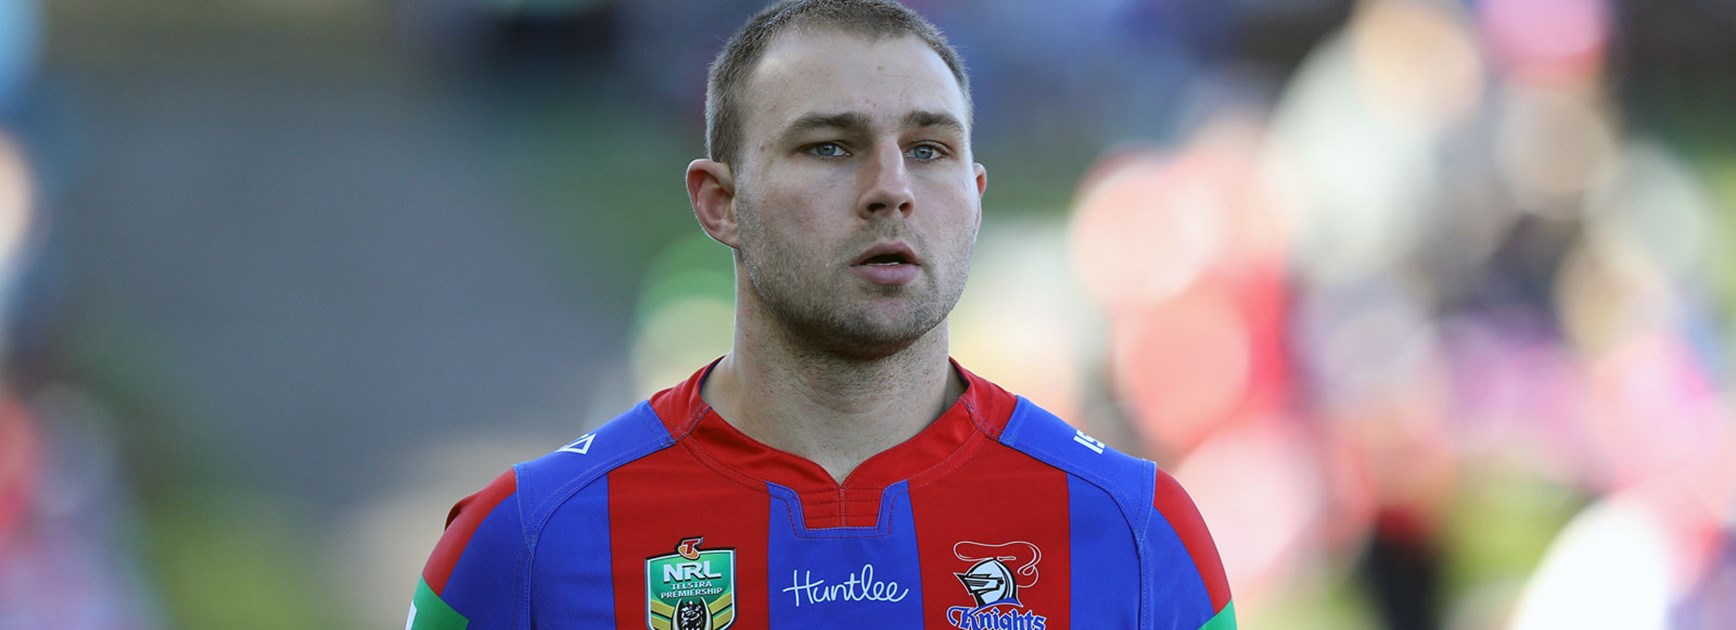 Knights forward Robbie Rochow is yet to secure his playing future beyond 2016.